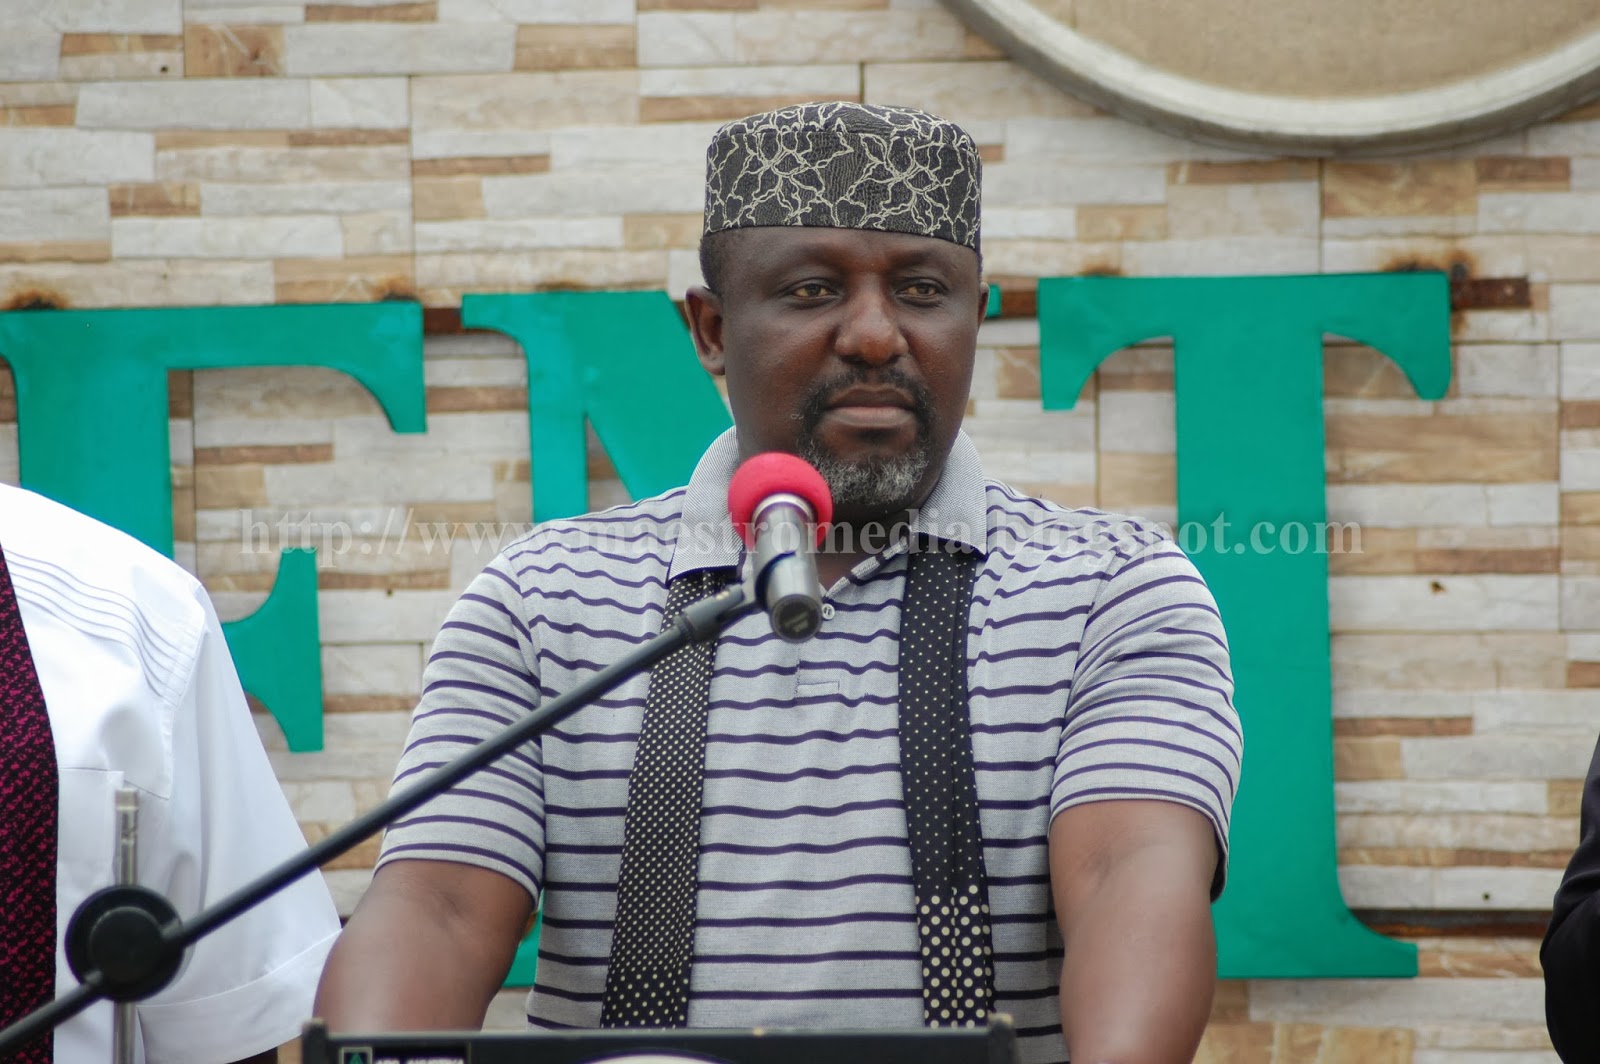 Governor Okorocha Alleged To Be Involved In Human Trafficking